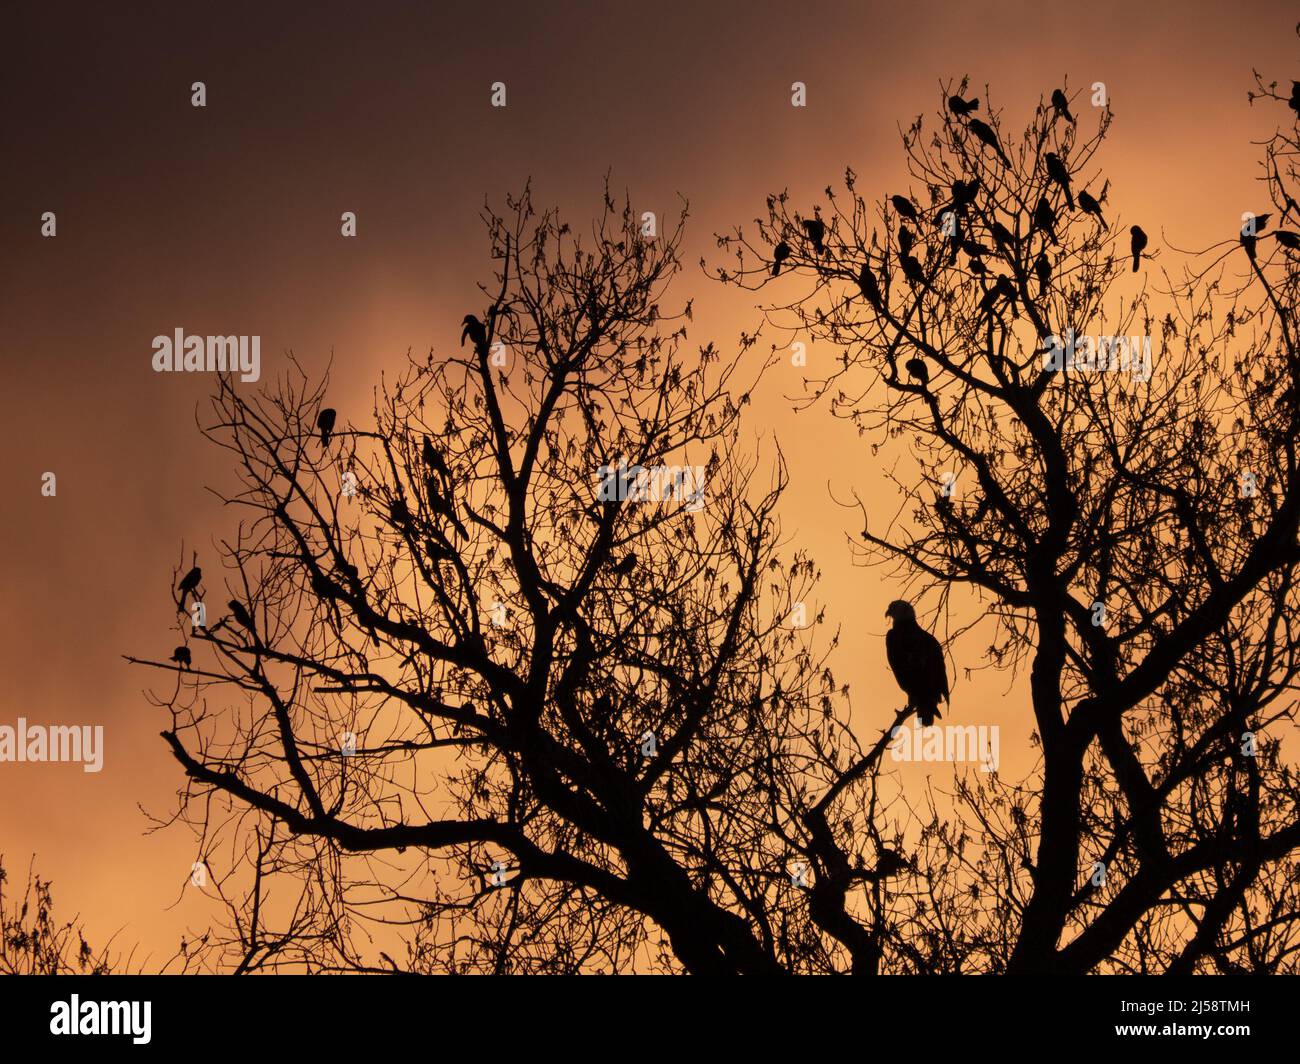 Bald Eagle and Grackles Perched in a Tree in a Storm Closeup Silhouette Stock Photo